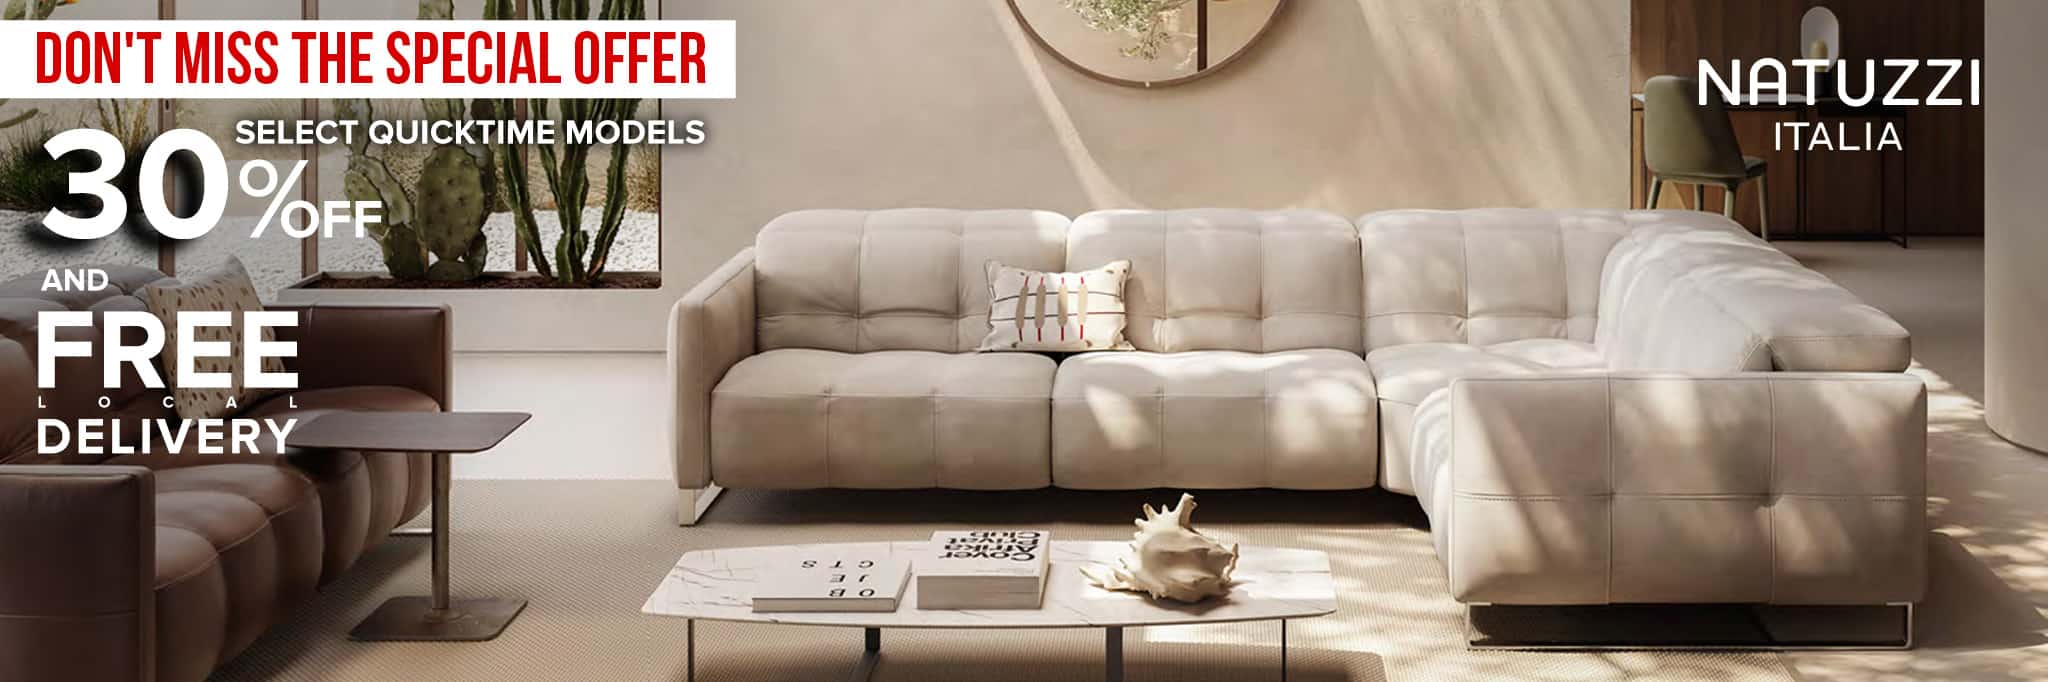 Natuzzi Italia special offer: save 30% off select QuickTime models and get a FREE local delivery!